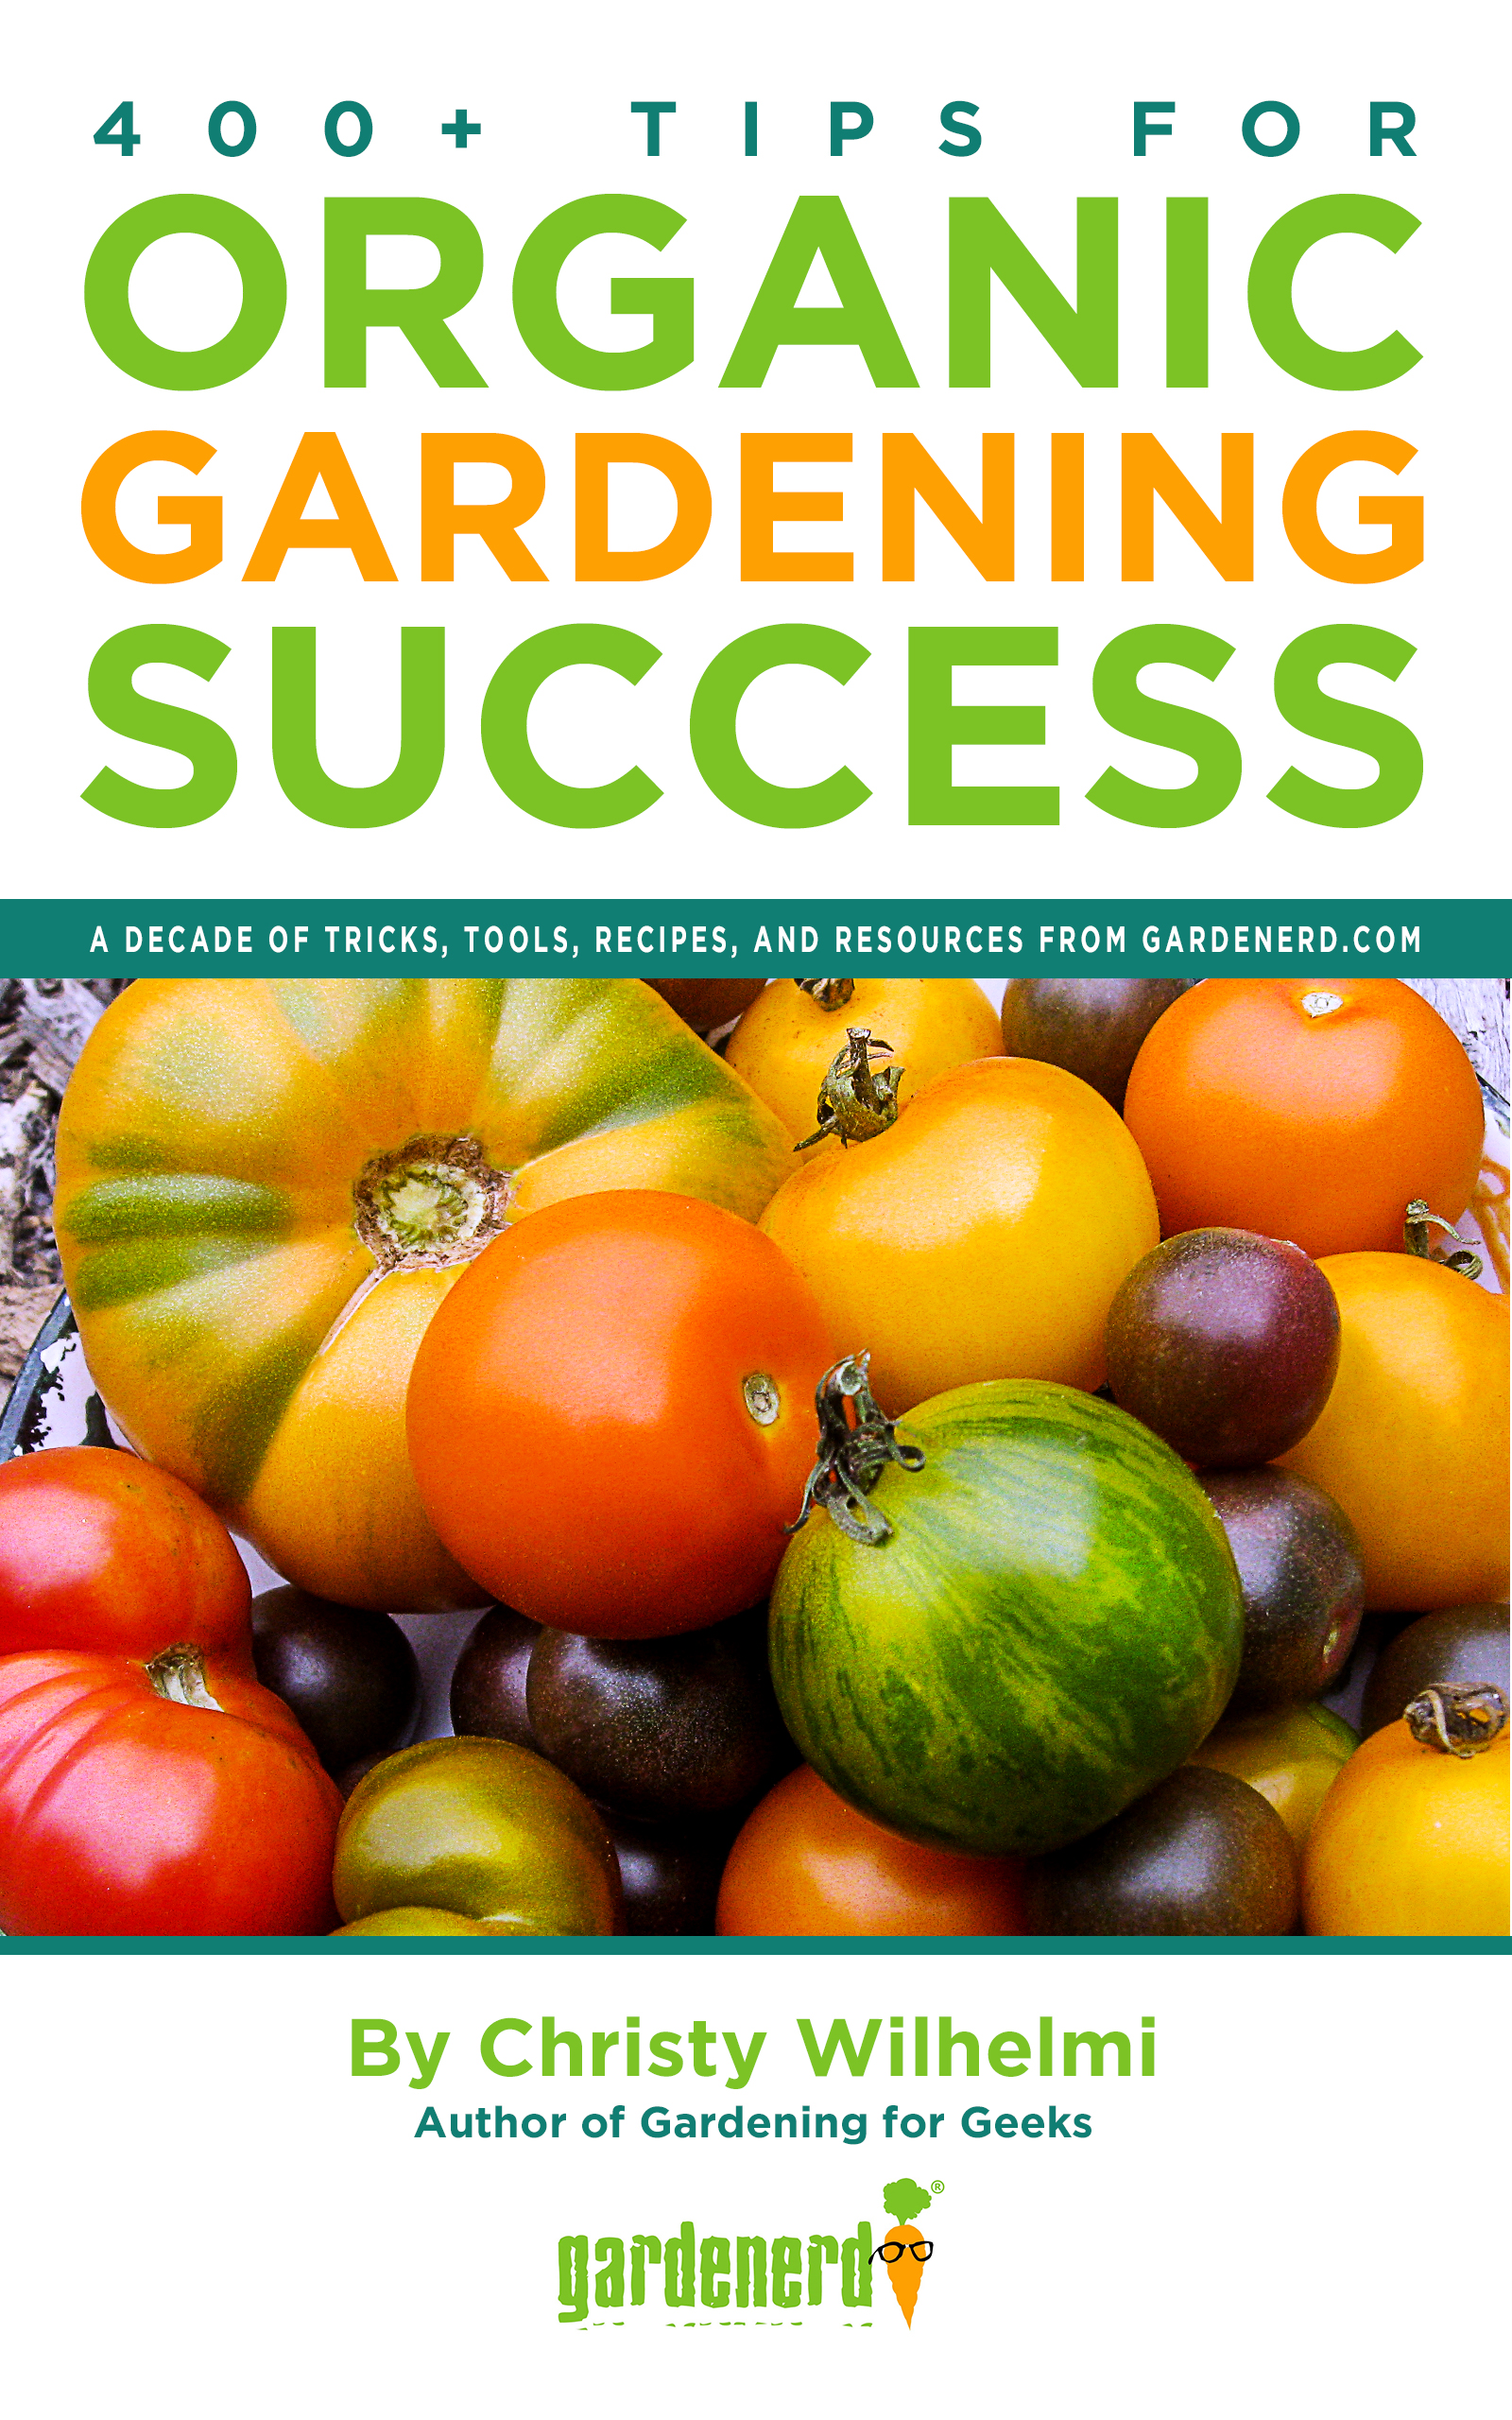 You are currently viewing New 400+ Tips Gardening Book for Summer!